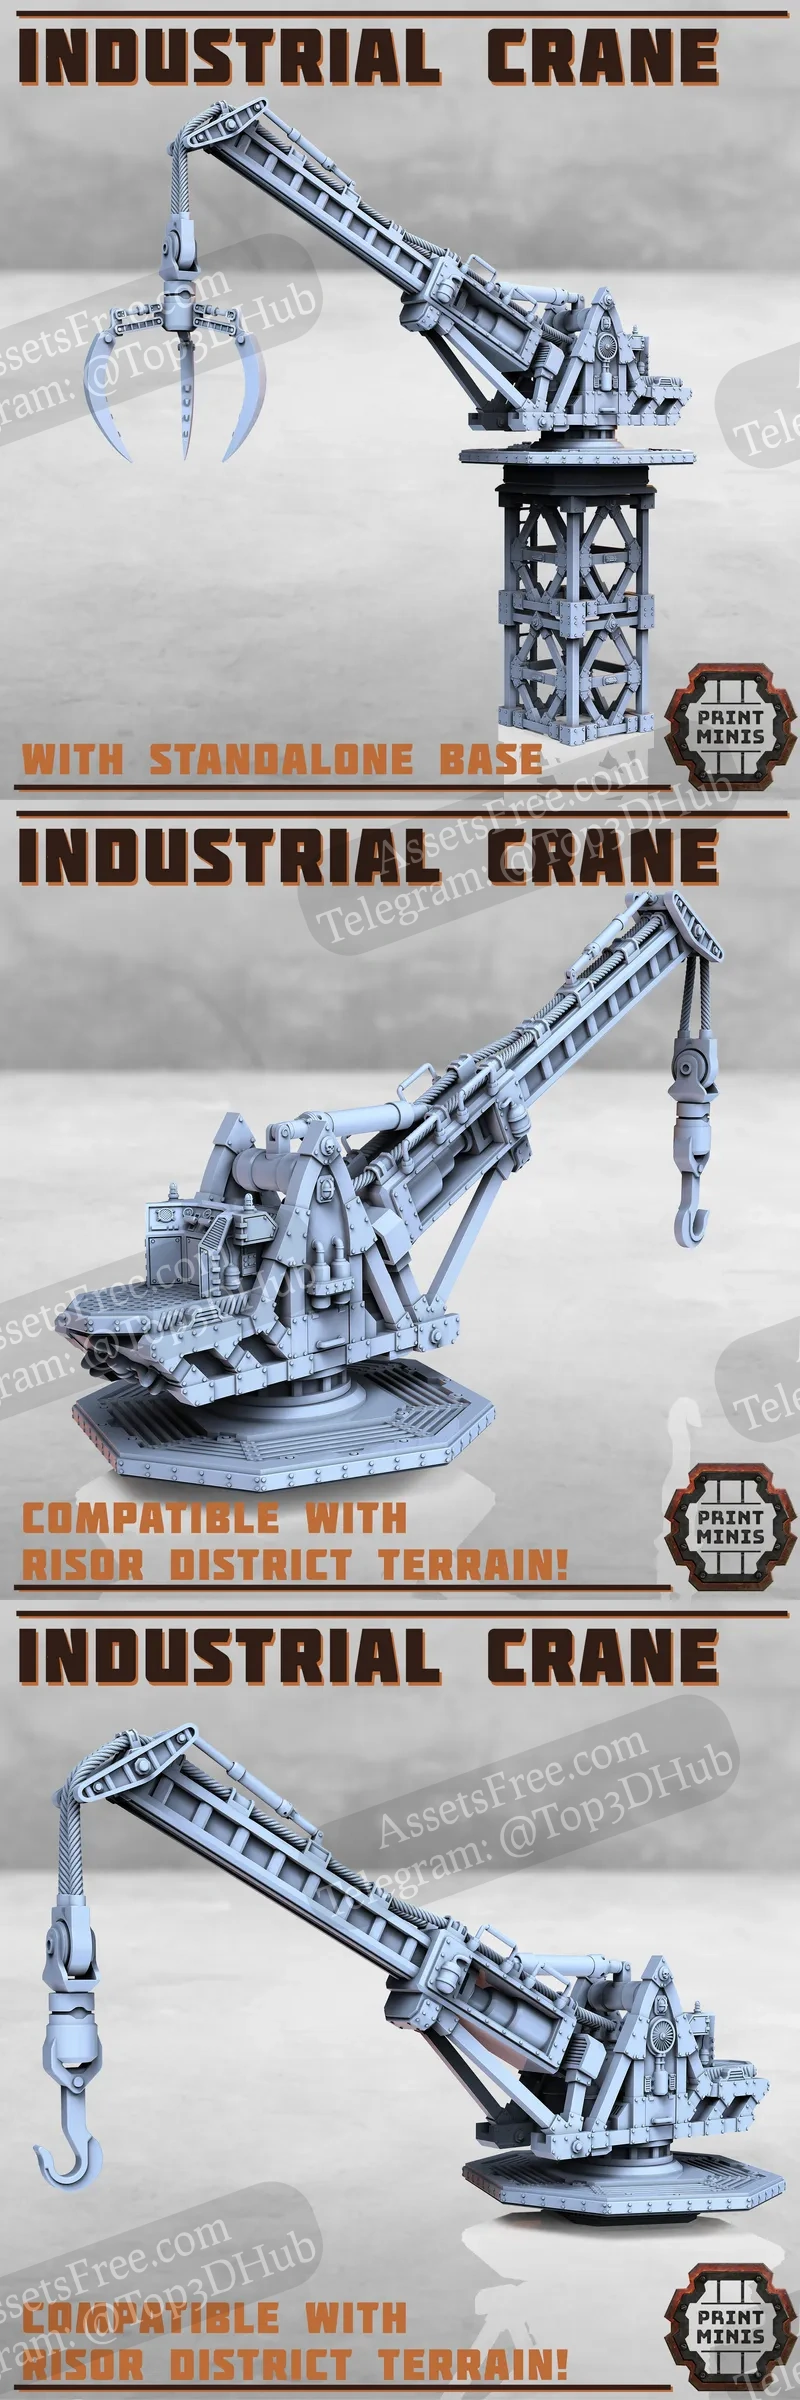 Industrial Crane with base